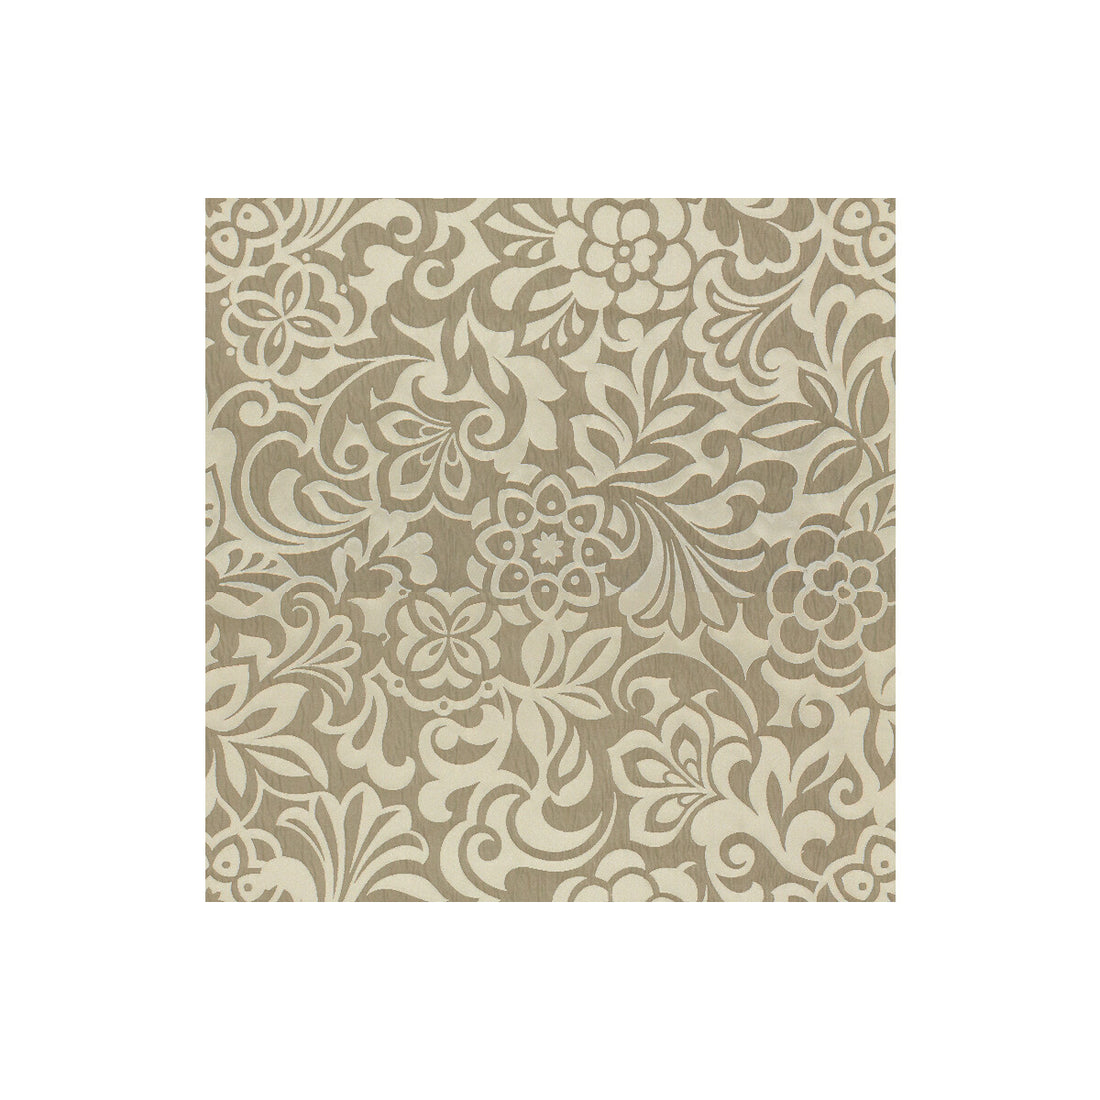 Sarasvati fabric in platinum color - pattern 32486.11.0 - by Kravet Contract in the Candice Olson collection